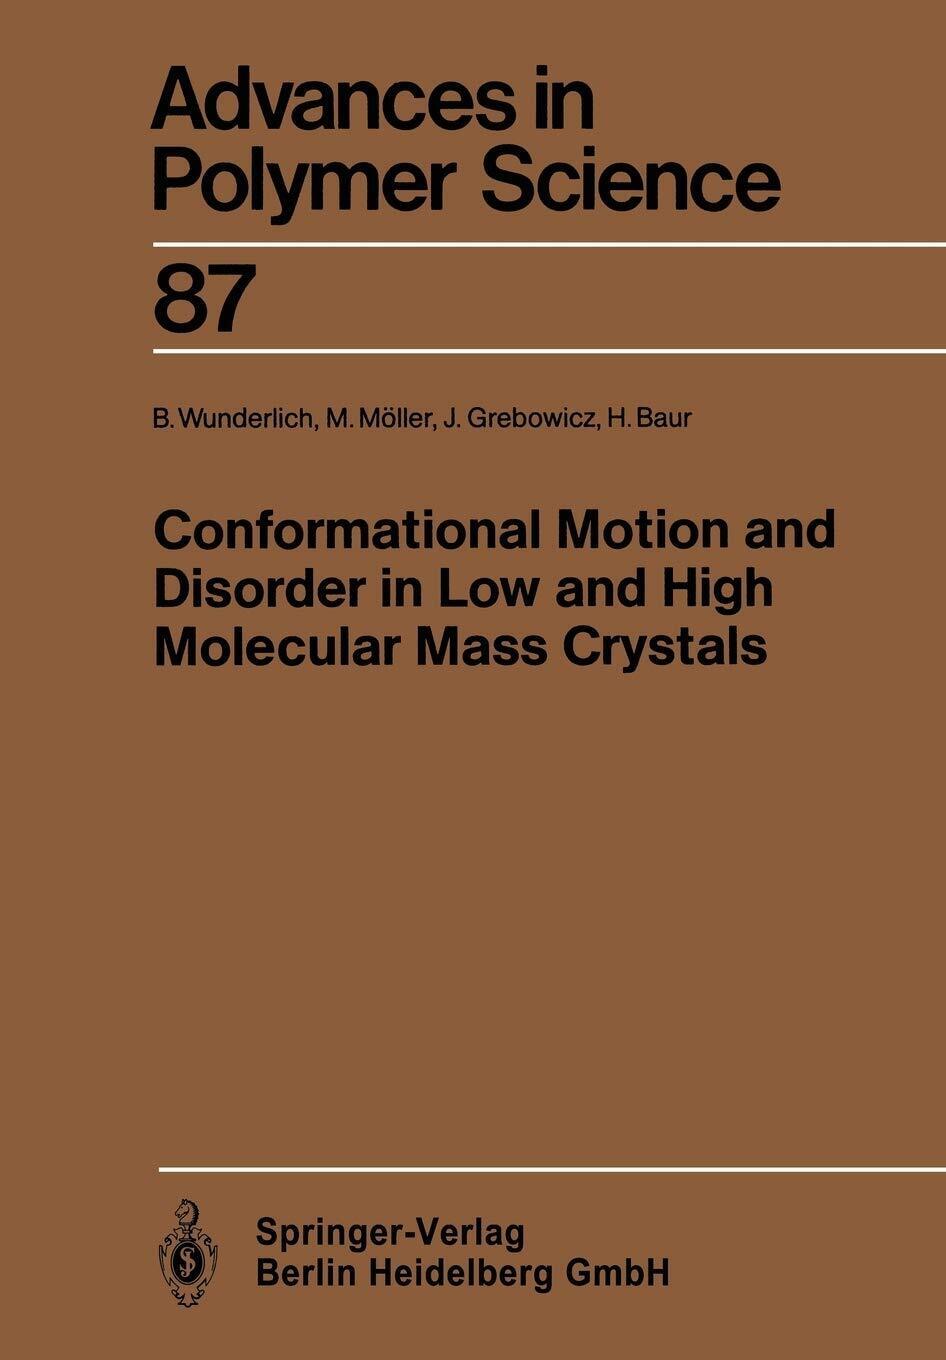 Conformational Motion and Disorder in Low and High Molecular Mass Crystals -2013